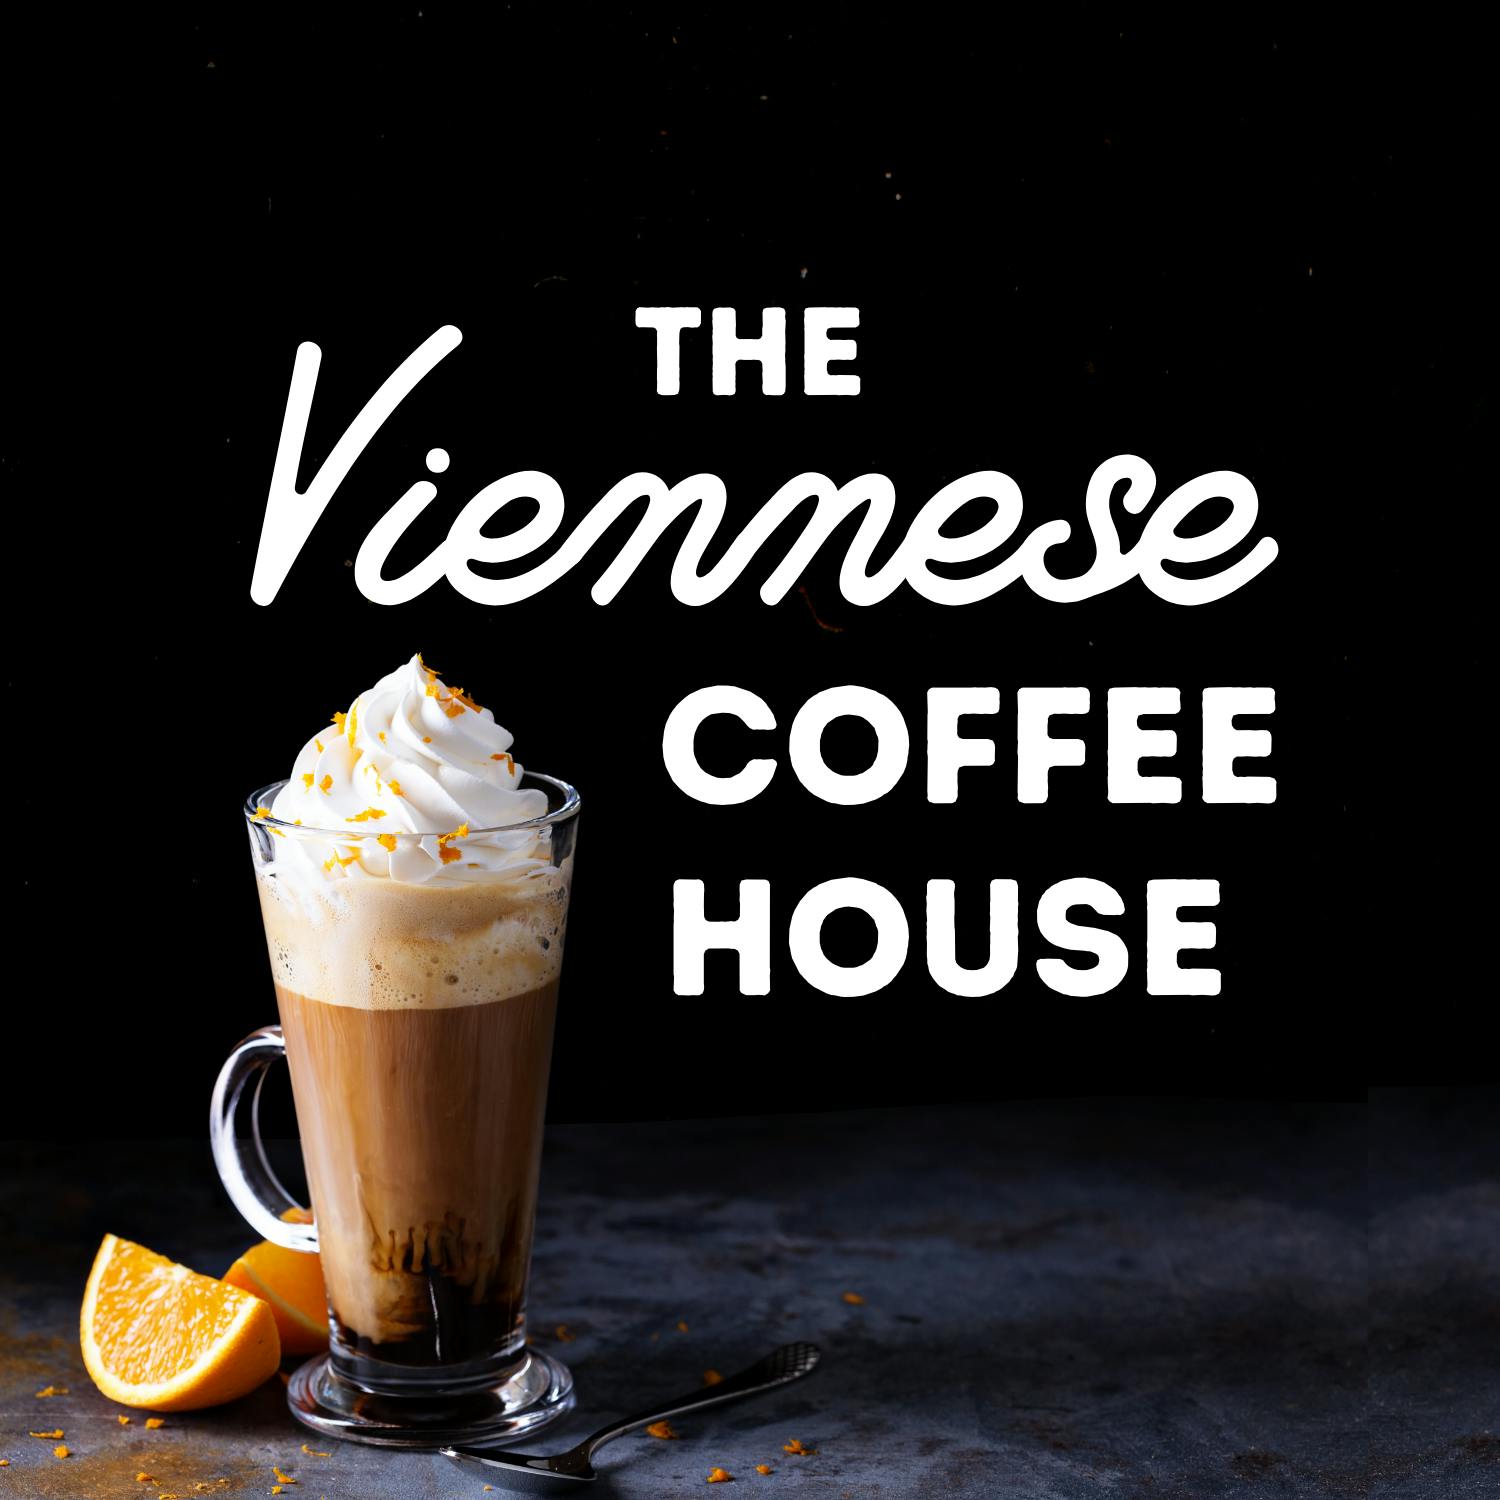 The Viennese Coffee House